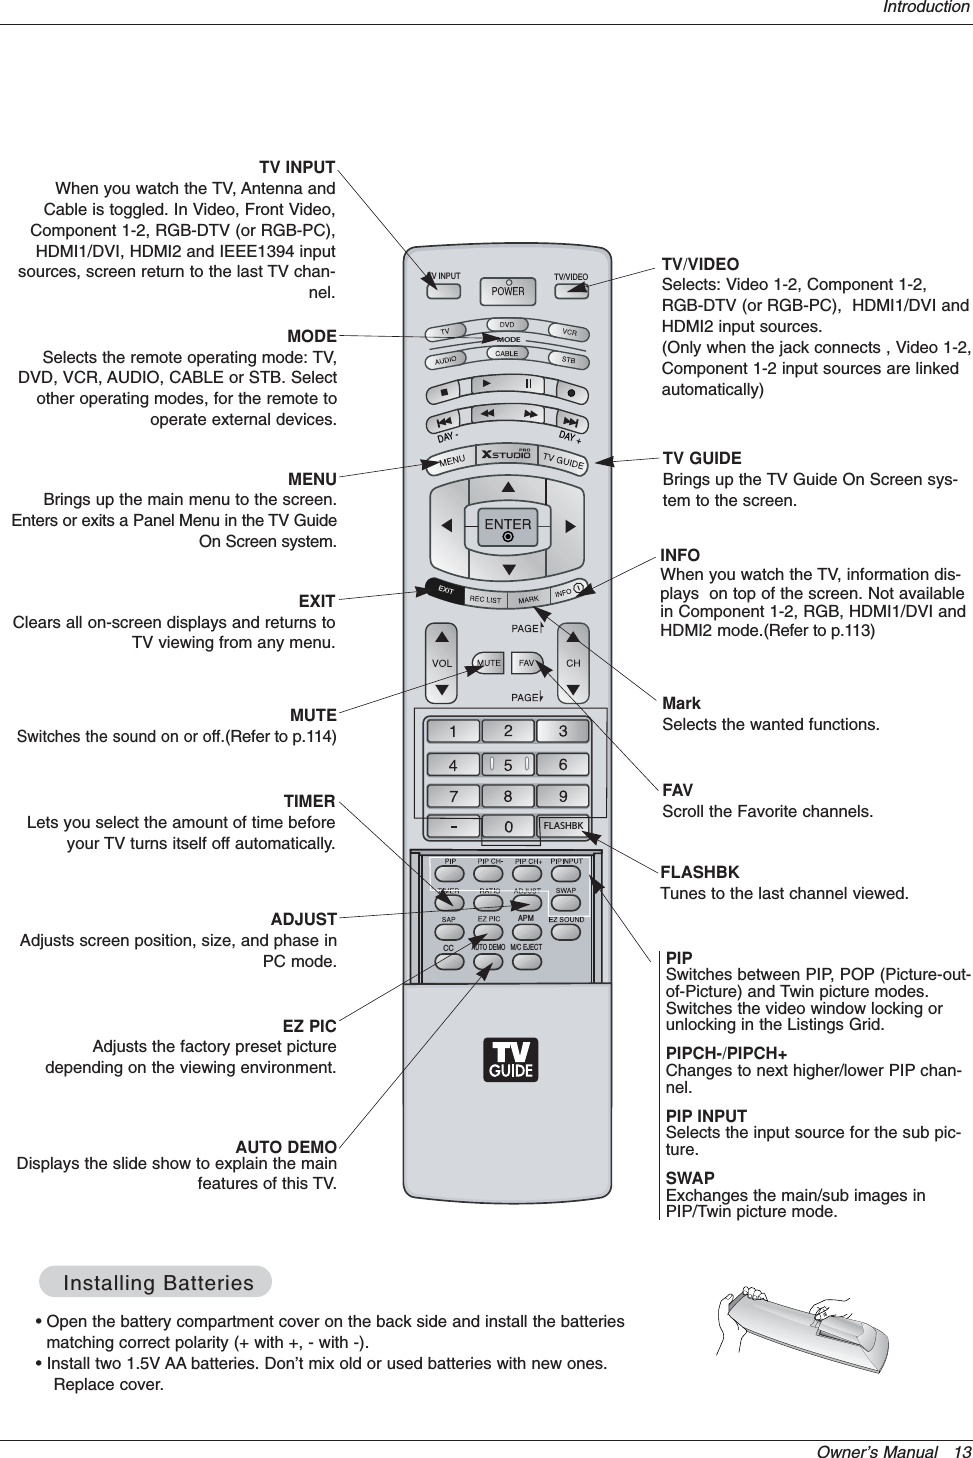 Owner’s Manual   13IntroductionMODEDAY -DAY +FLASHBKAPMCCAUTO DEMOM/C EJECTTV INPUT TV/VIDEOTV INPUTWhen you watch the TV, Antenna andCable is toggled. In Video, Front Video,Component 1-2, RGB-DTV (or RGB-PC),HDMI1/DVI, HDMI2 and IEEE1394 inputsources, screen return to the last TV chan-nel.MUTESwitches the sound on or off.(Refer to p.114)MODESelects the remote operating mode: TV,DVD, VCR, AUDIO, CABLE or STB. Selectother operating modes, for the remote tooperate external devices.FLASHBKTunes to the last channel viewed.EXITClears all on-screen displays and returns toTV viewing from any menu.TIMERLets you select the amount of time beforeyour TV turns itself off automatically.MENUBrings up the main menu to the screen.Enters or exits a Panel Menu in the TV GuideOn Screen system.PIPSwitches between PIP, POP (Picture-out-of-Picture) and Twin picture modes.Switches the video window locking orunlocking in the Listings Grid.PIPCH-/PIPCH+Changes to next higher/lower PIP chan-nel.PIP INPUTSelects the input source for the sub pic-ture.SWAPExchanges the main/sub images inPIP/Twin picture mode.EZ PICAdjusts the factory preset picturedepending on the viewing environment.ADJUSTAdjusts screen position, size, and phase inPC mode.AUTO DEMODisplays the slide show to explain the mainfeatures of this TV.  TV/VIDEOSelects: Video 1-2, Component 1-2,RGB-DTV (or RGB-PC),  HDMI1/DVI andHDMI2 input sources.(Only when the jack connects , Video 1-2,Component 1-2 input sources are linkedautomatically)INFOWhen you watch the TV, information dis-plays  on top of the screen. Not availablein Component 1-2, RGB, HDMI1/DVI andHDMI2 mode.(Refer to p.113)FAVScroll the Favorite channels.TV GUIDEBrings up the TV Guide On Screen sys-tem to the screen.MarkSelects the wanted functions.• Open the battery compartment cover on the back side and install the batteriesmatching correct polarity (+ with +, - with -).• Install two 1.5V AA batteries. Don’t mix old or used batteries with new ones.Replace cover.Installing BatteriesInstalling Batteries